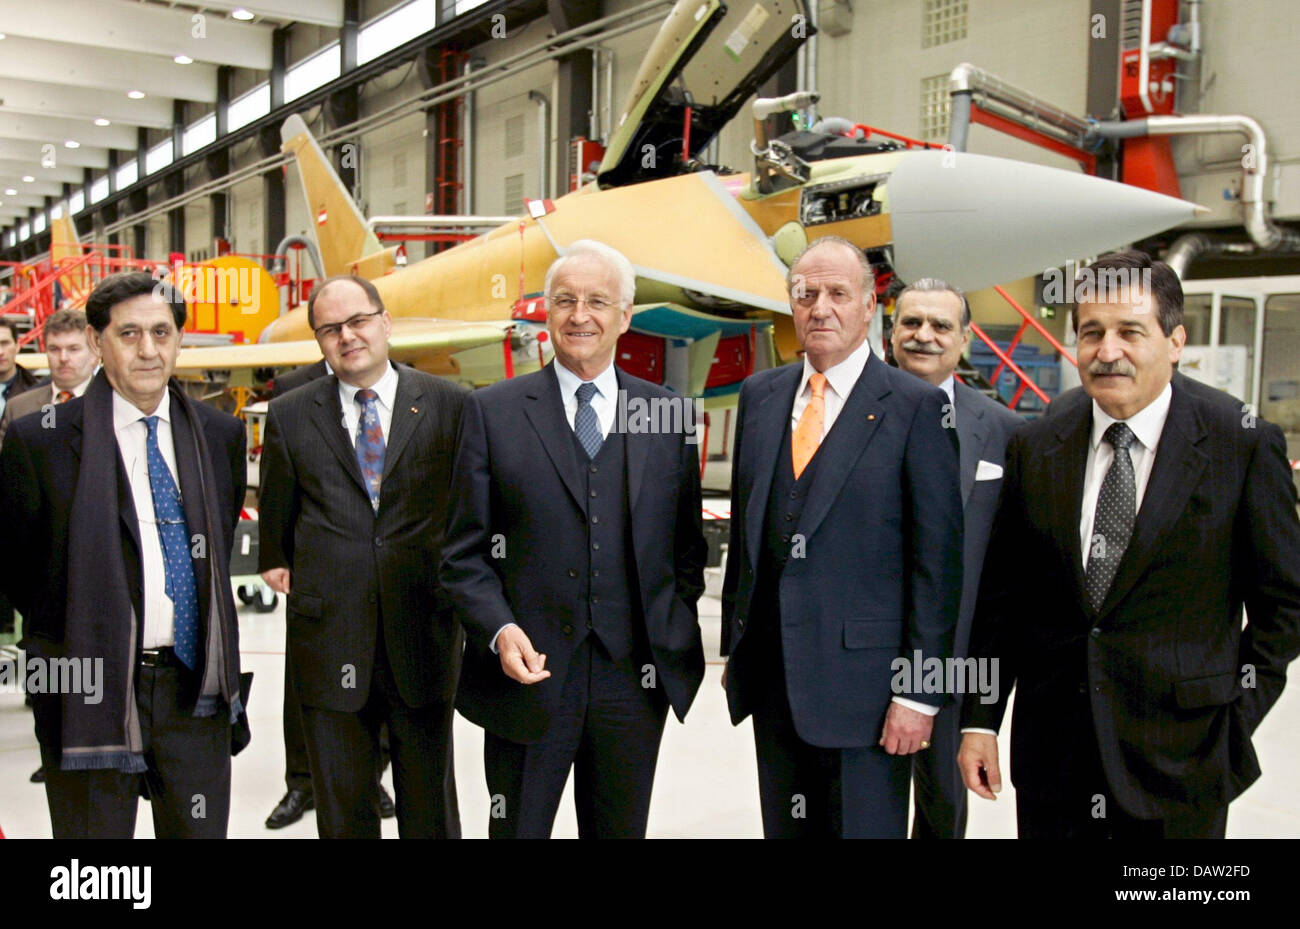 Juan Carlos I., King of Spain (2. R), Bavarian Prime Minister Edmund Stoiber (3. R) and EADS administrative director Manfred Bischoff (R) pose in front of an Eurofighter jet at the military aeronatutic centre in Manching, Germany, Wednesday, 07 February 2007. The King of Spain informed himself about technological developments of aircraft construction at the European Aeronautic Defe Stock Photo